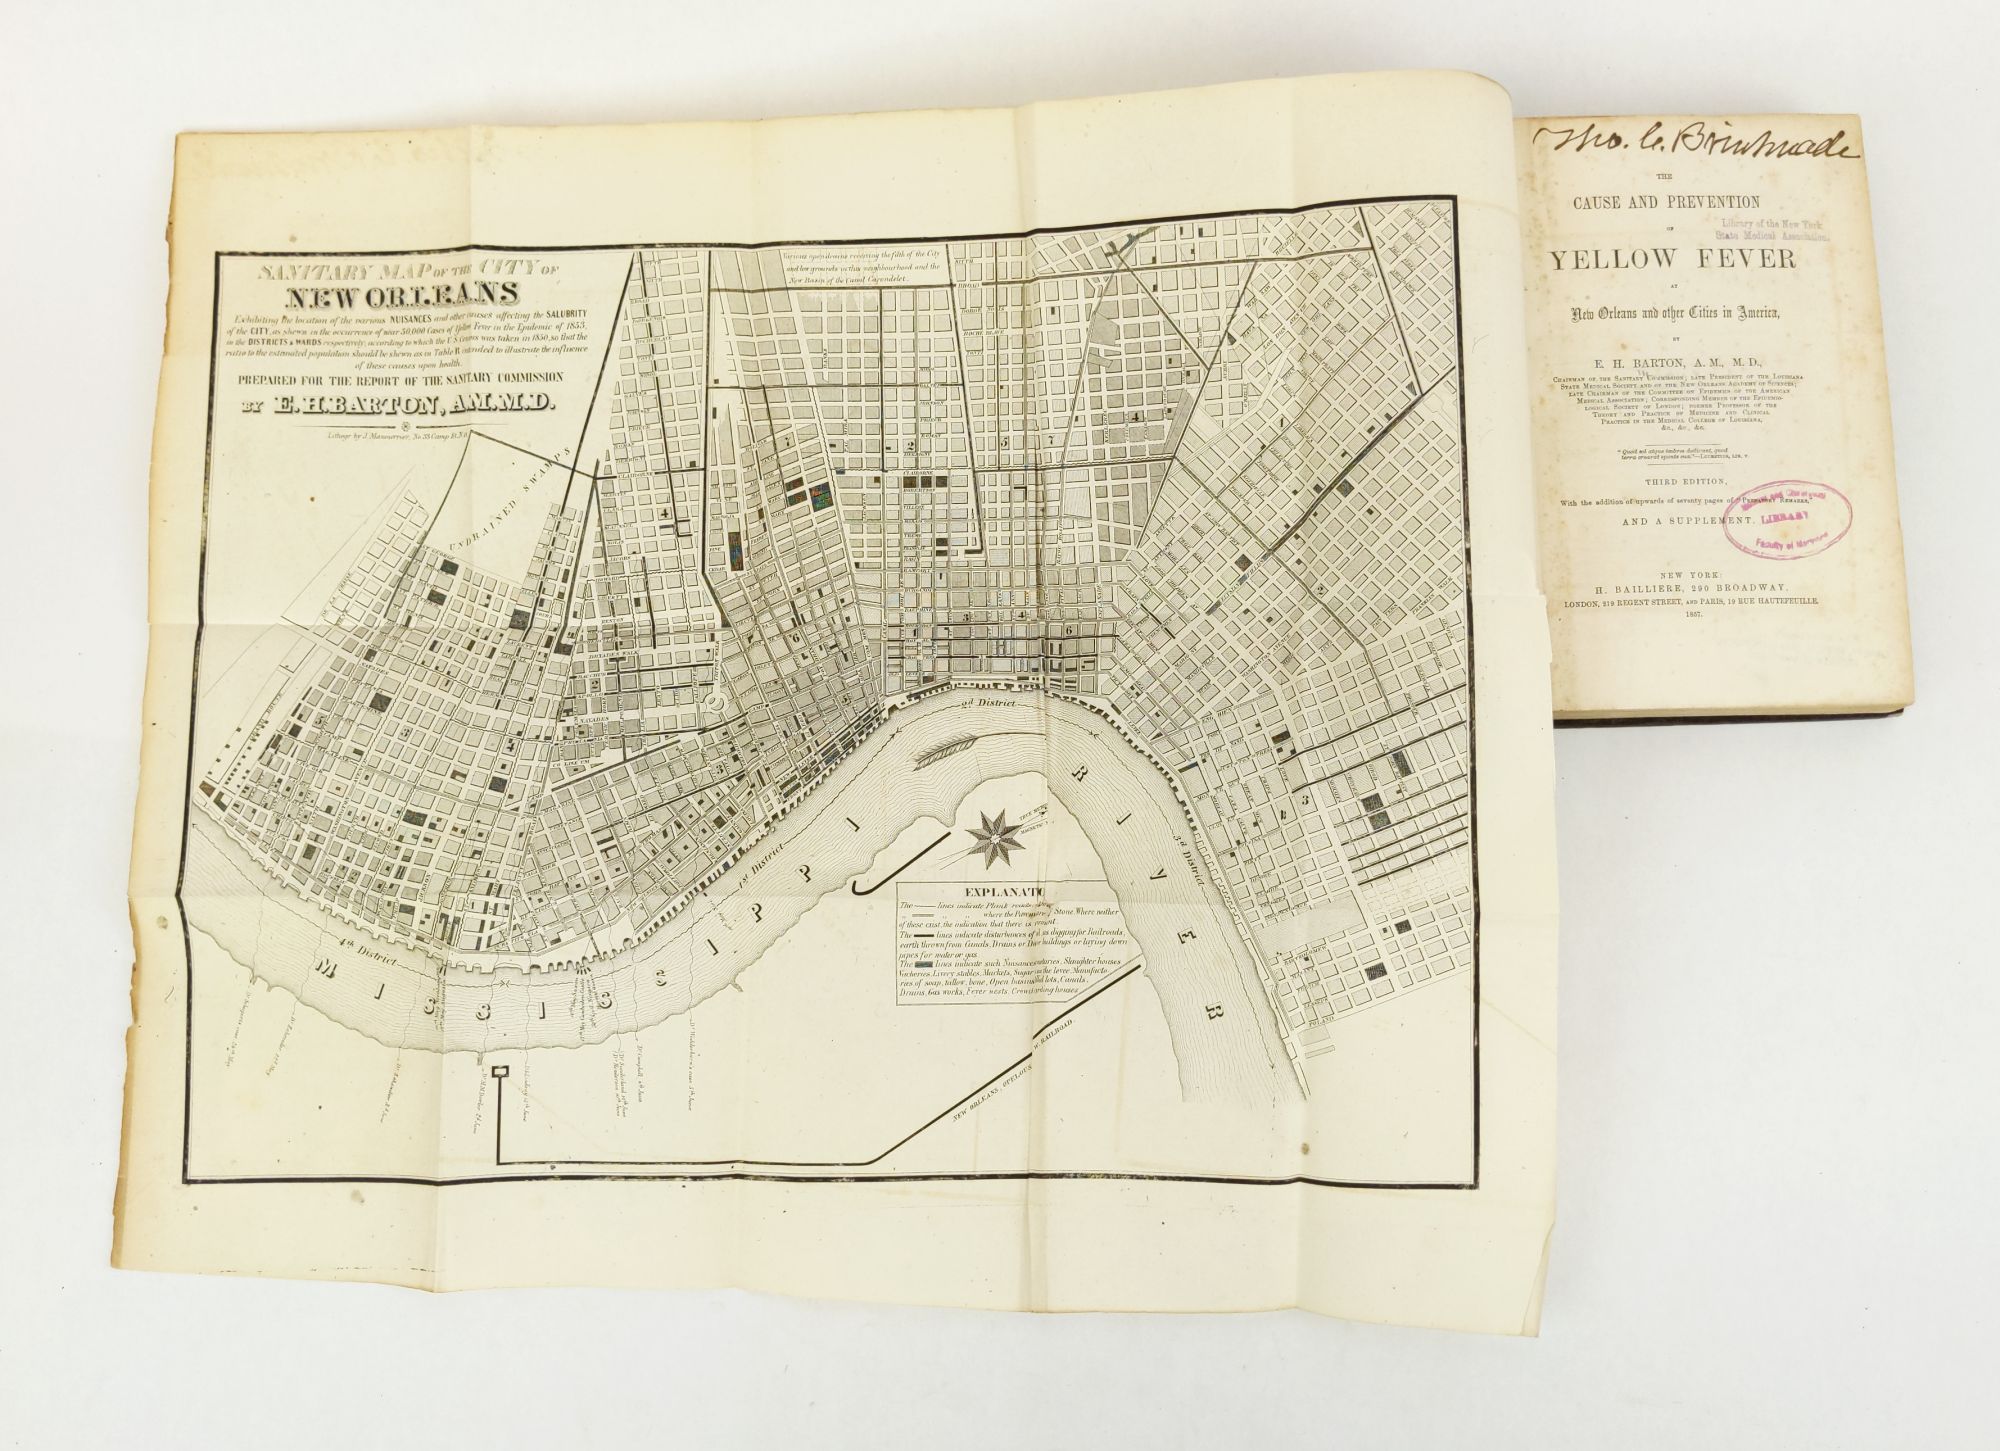 Product Image for THE CAUSE AND PREVENTION OF YELLOW FEVER AT NEW ORLEANS AND OTHER CITIES IN AMERICA [Inscribed]